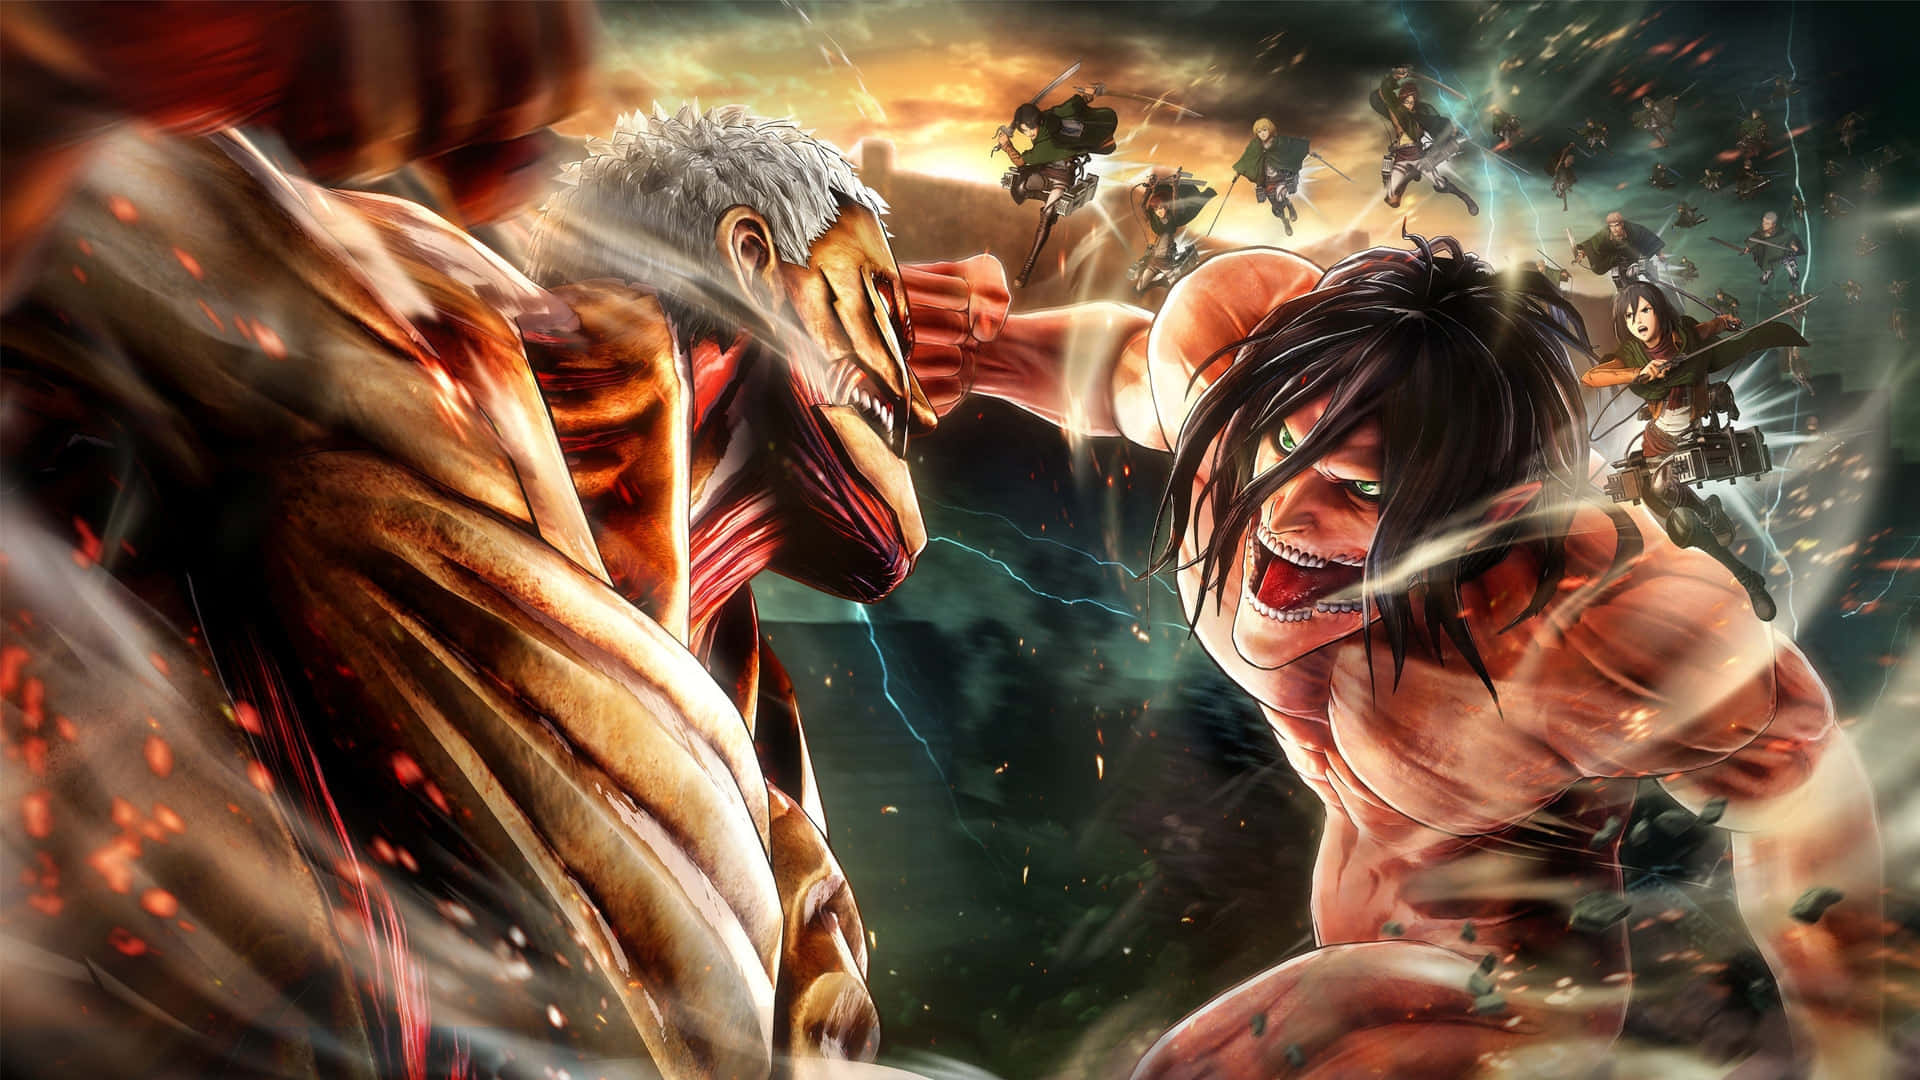 Staring into the eyes of the Armored Titan Wallpaper